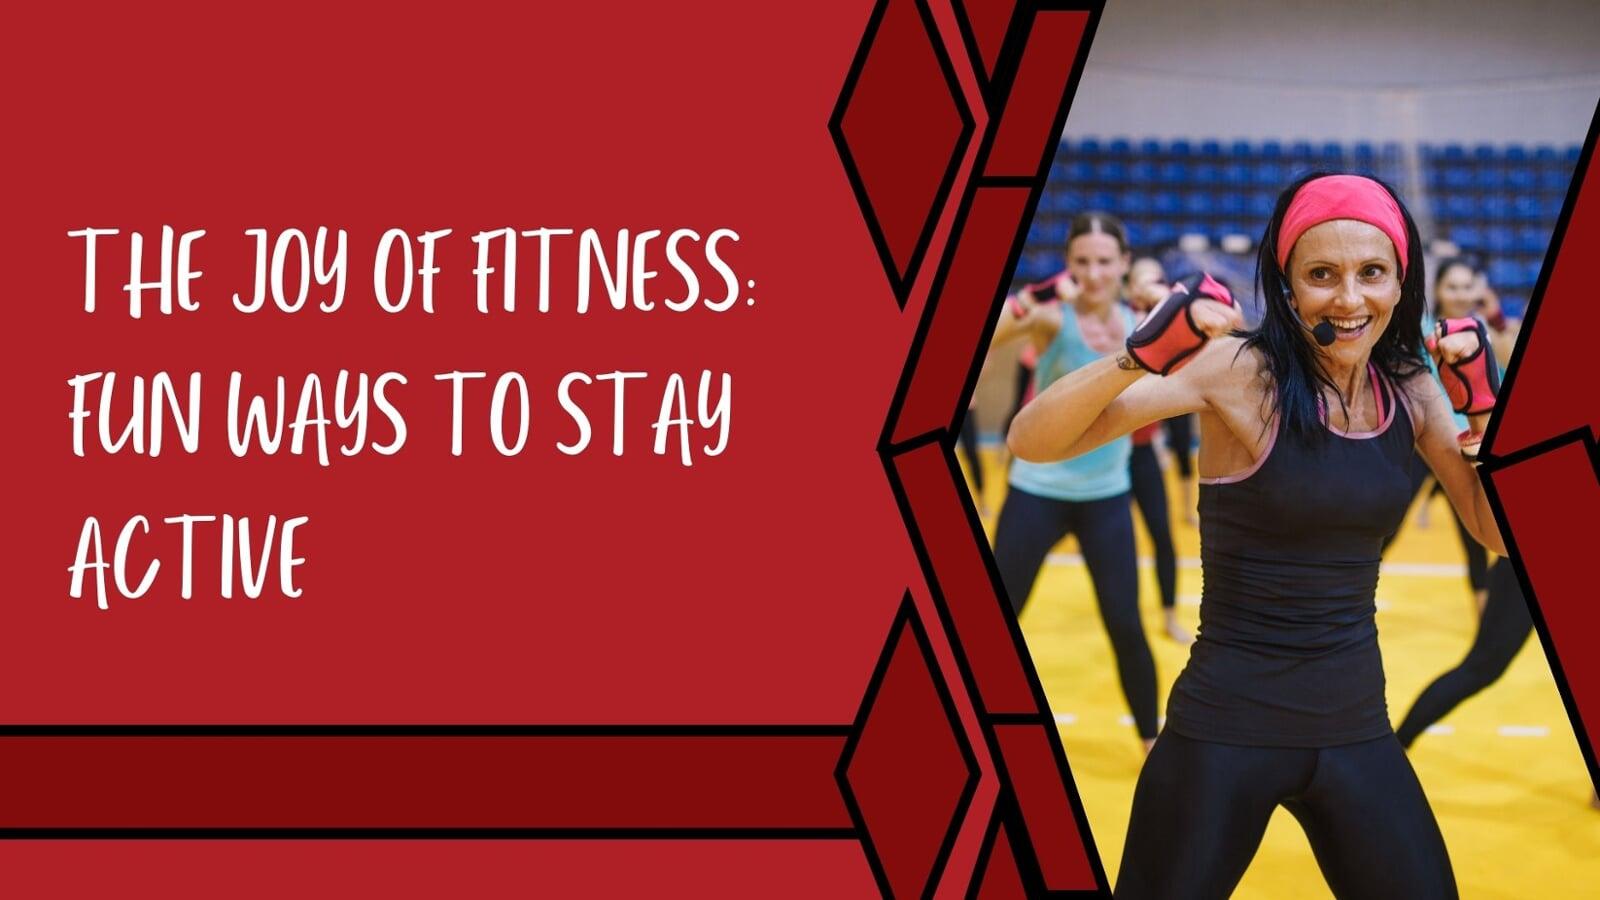 The Joy of Fitness: Fun Ways to Stay Active